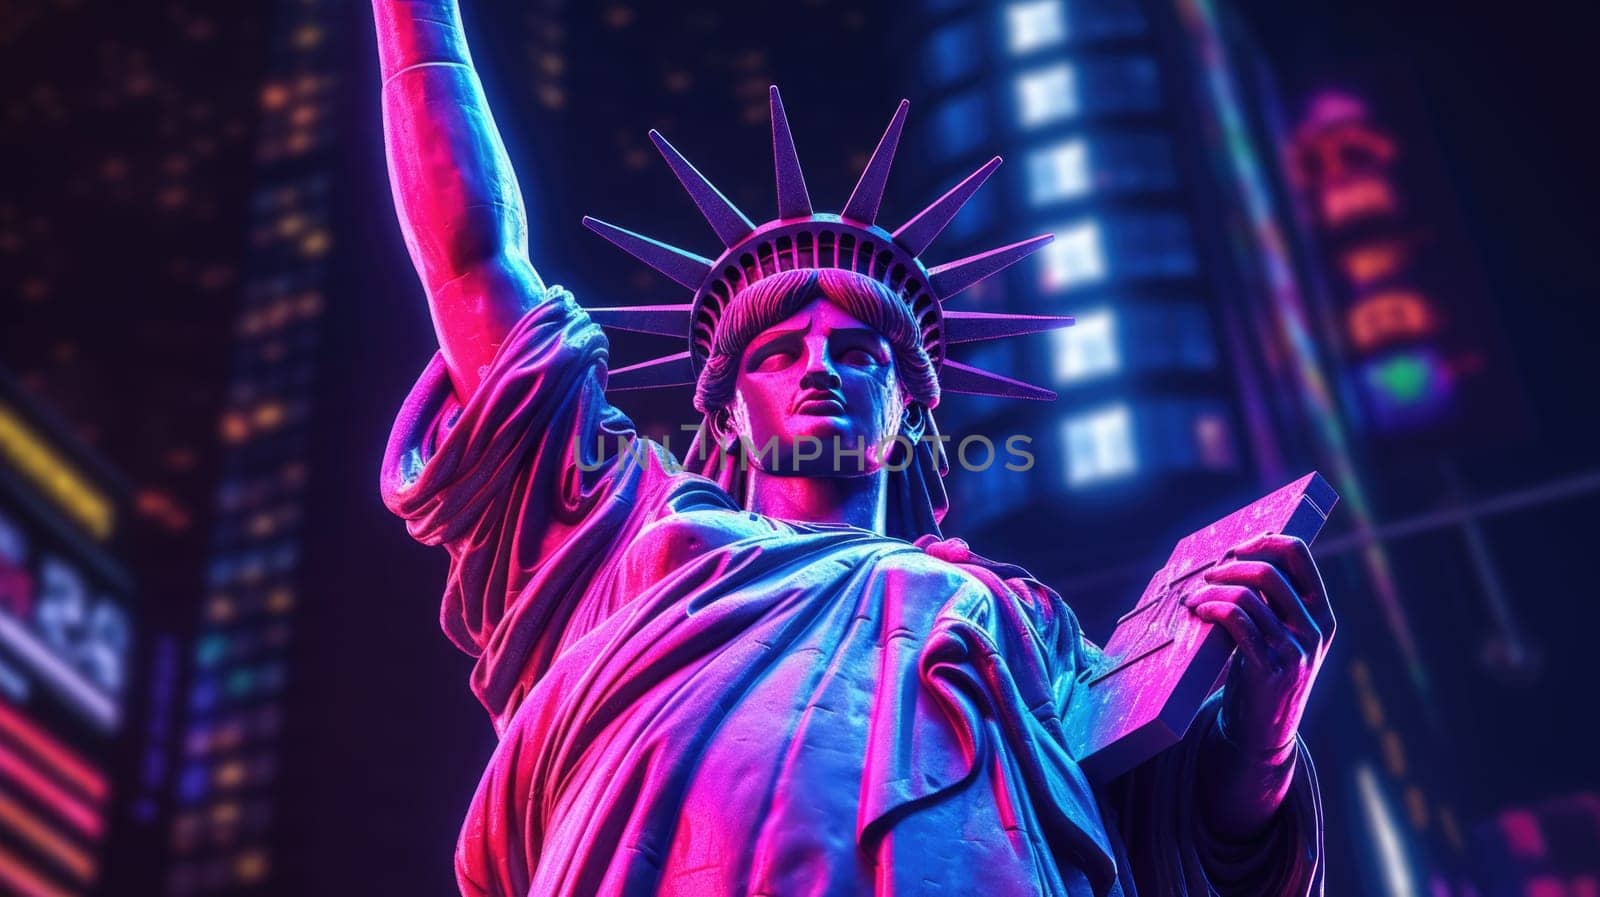 Close up view of Statue of Liberty with a glowing blue and pink neon light at night in futuristic style by JuliaDorian